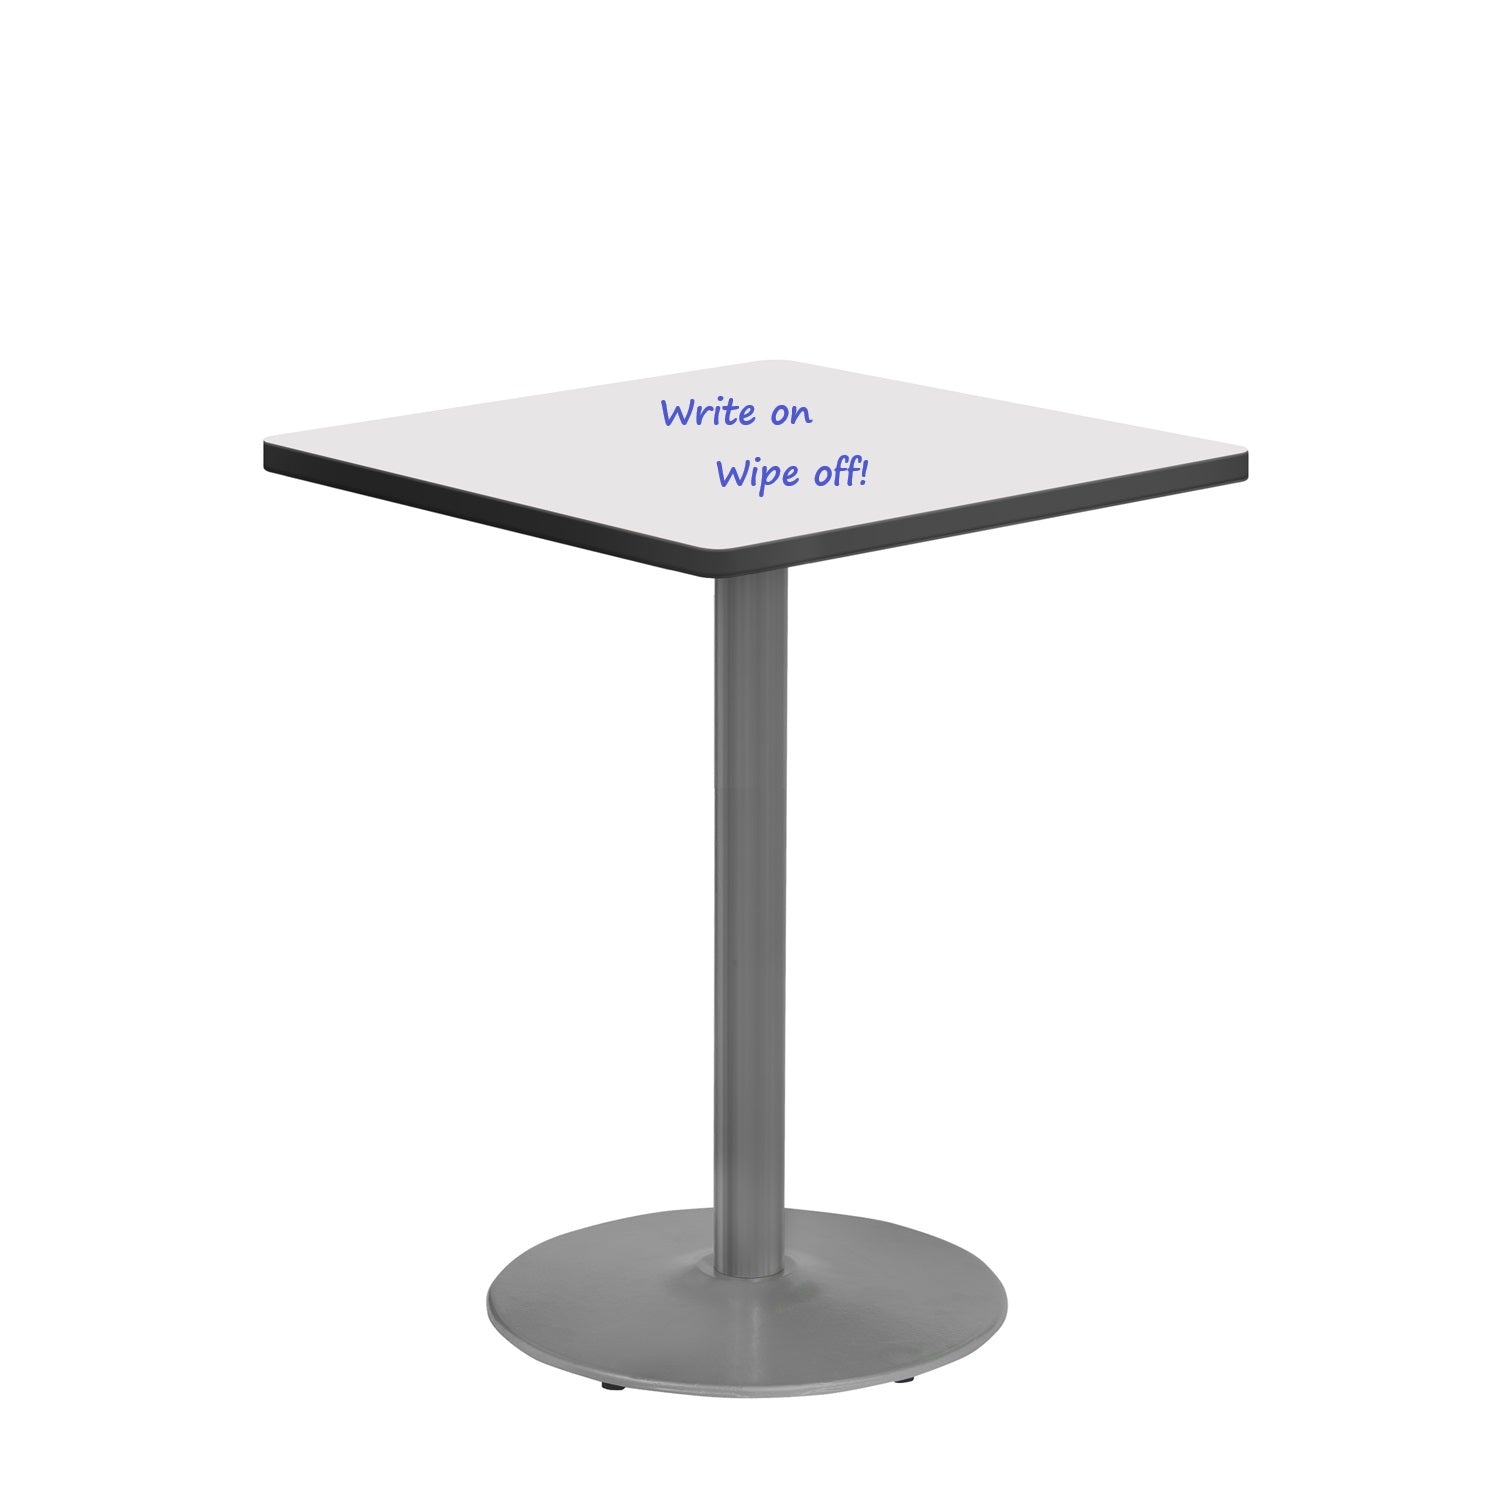 30" Square Standing Height Café Table with Dry-Erase Whiteboard Top